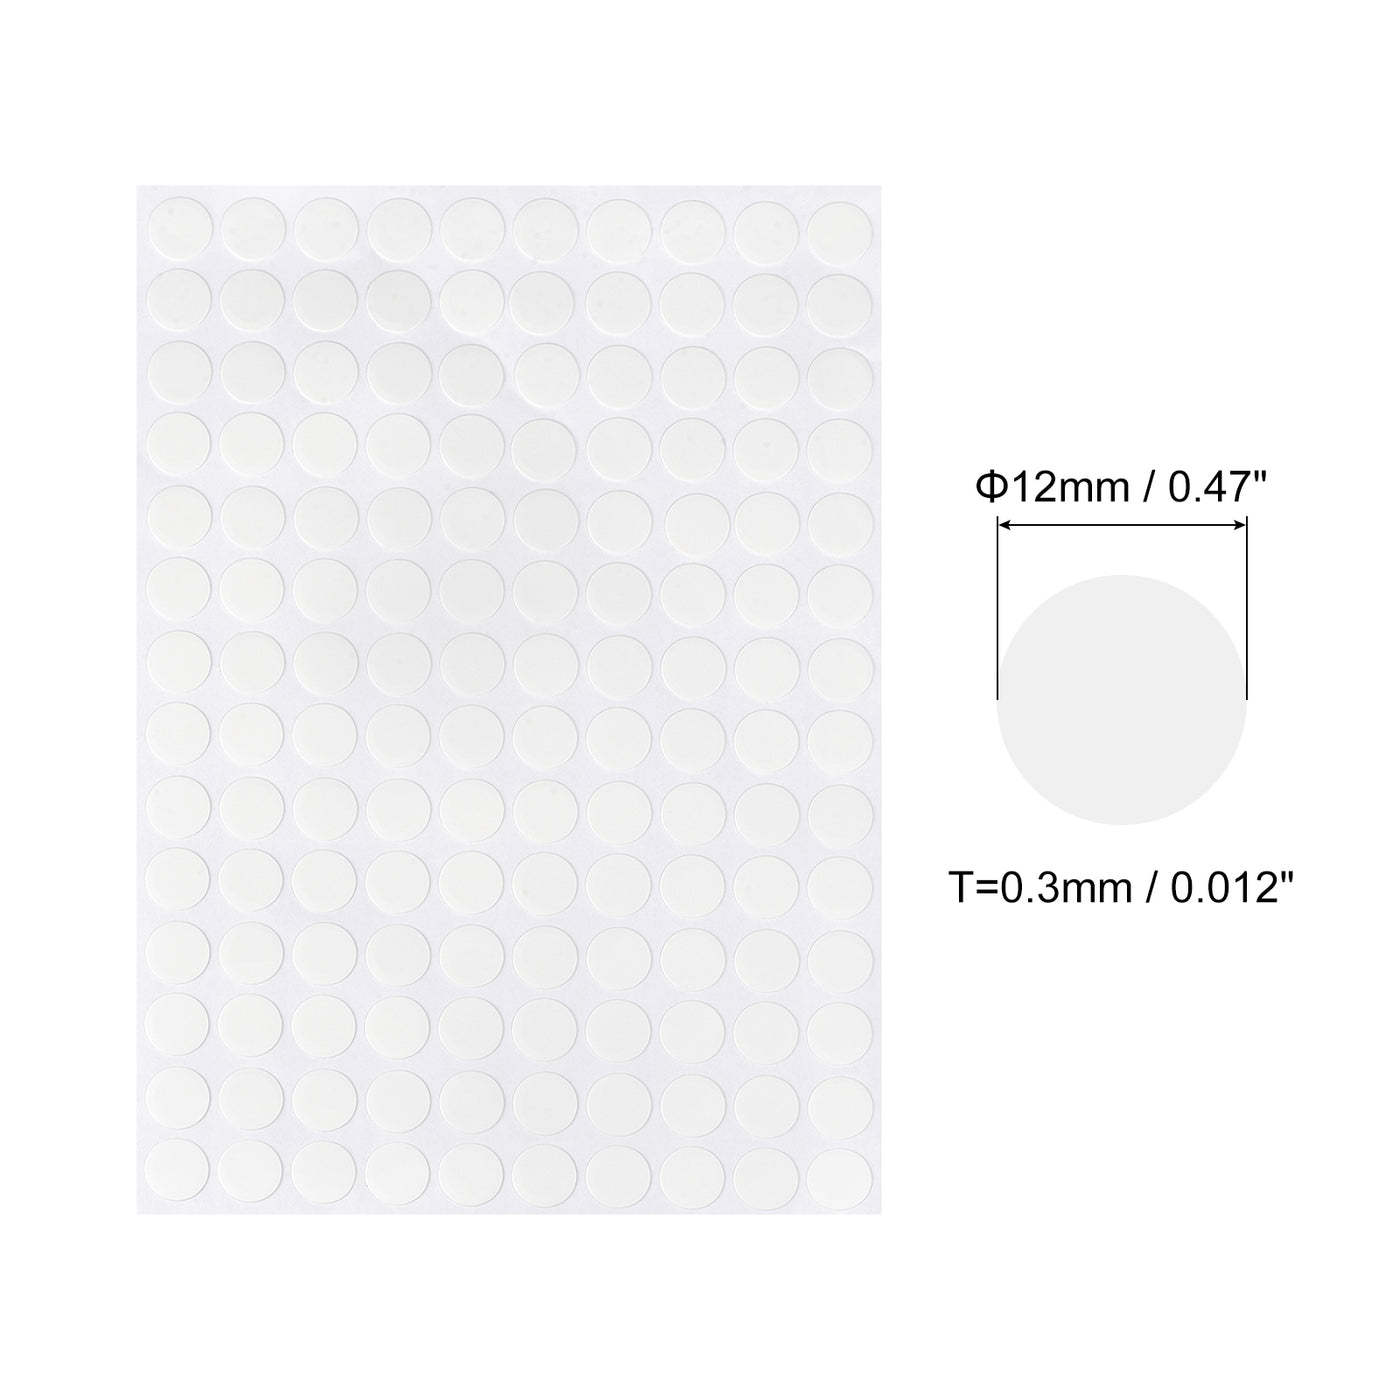 uxcell Uxcell Screw Hole Cover Stickers, 12mm Dia PVC Self Adhesive Covers Caps for Wood Furniture Cabinet Shelf Wardrobe, White 2 Sheet/280pcs